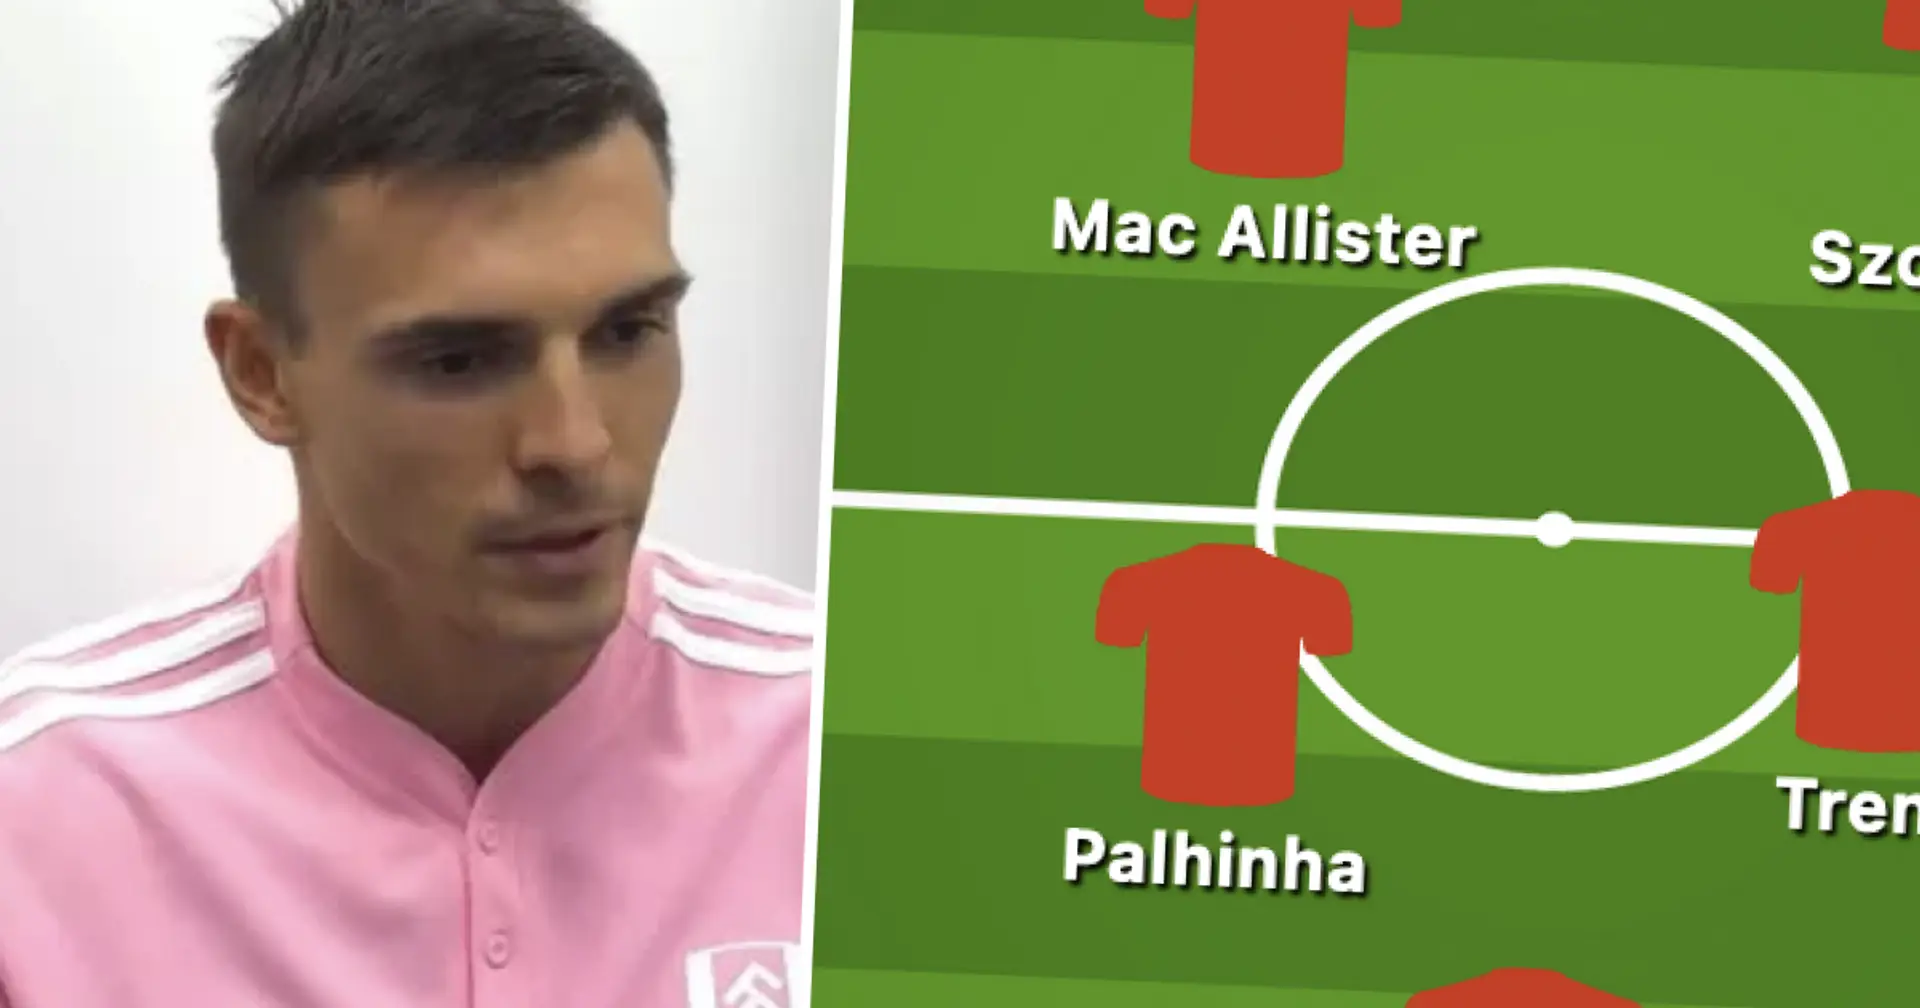 The best way Liverpool can line up with Joao Palhinha illustrated